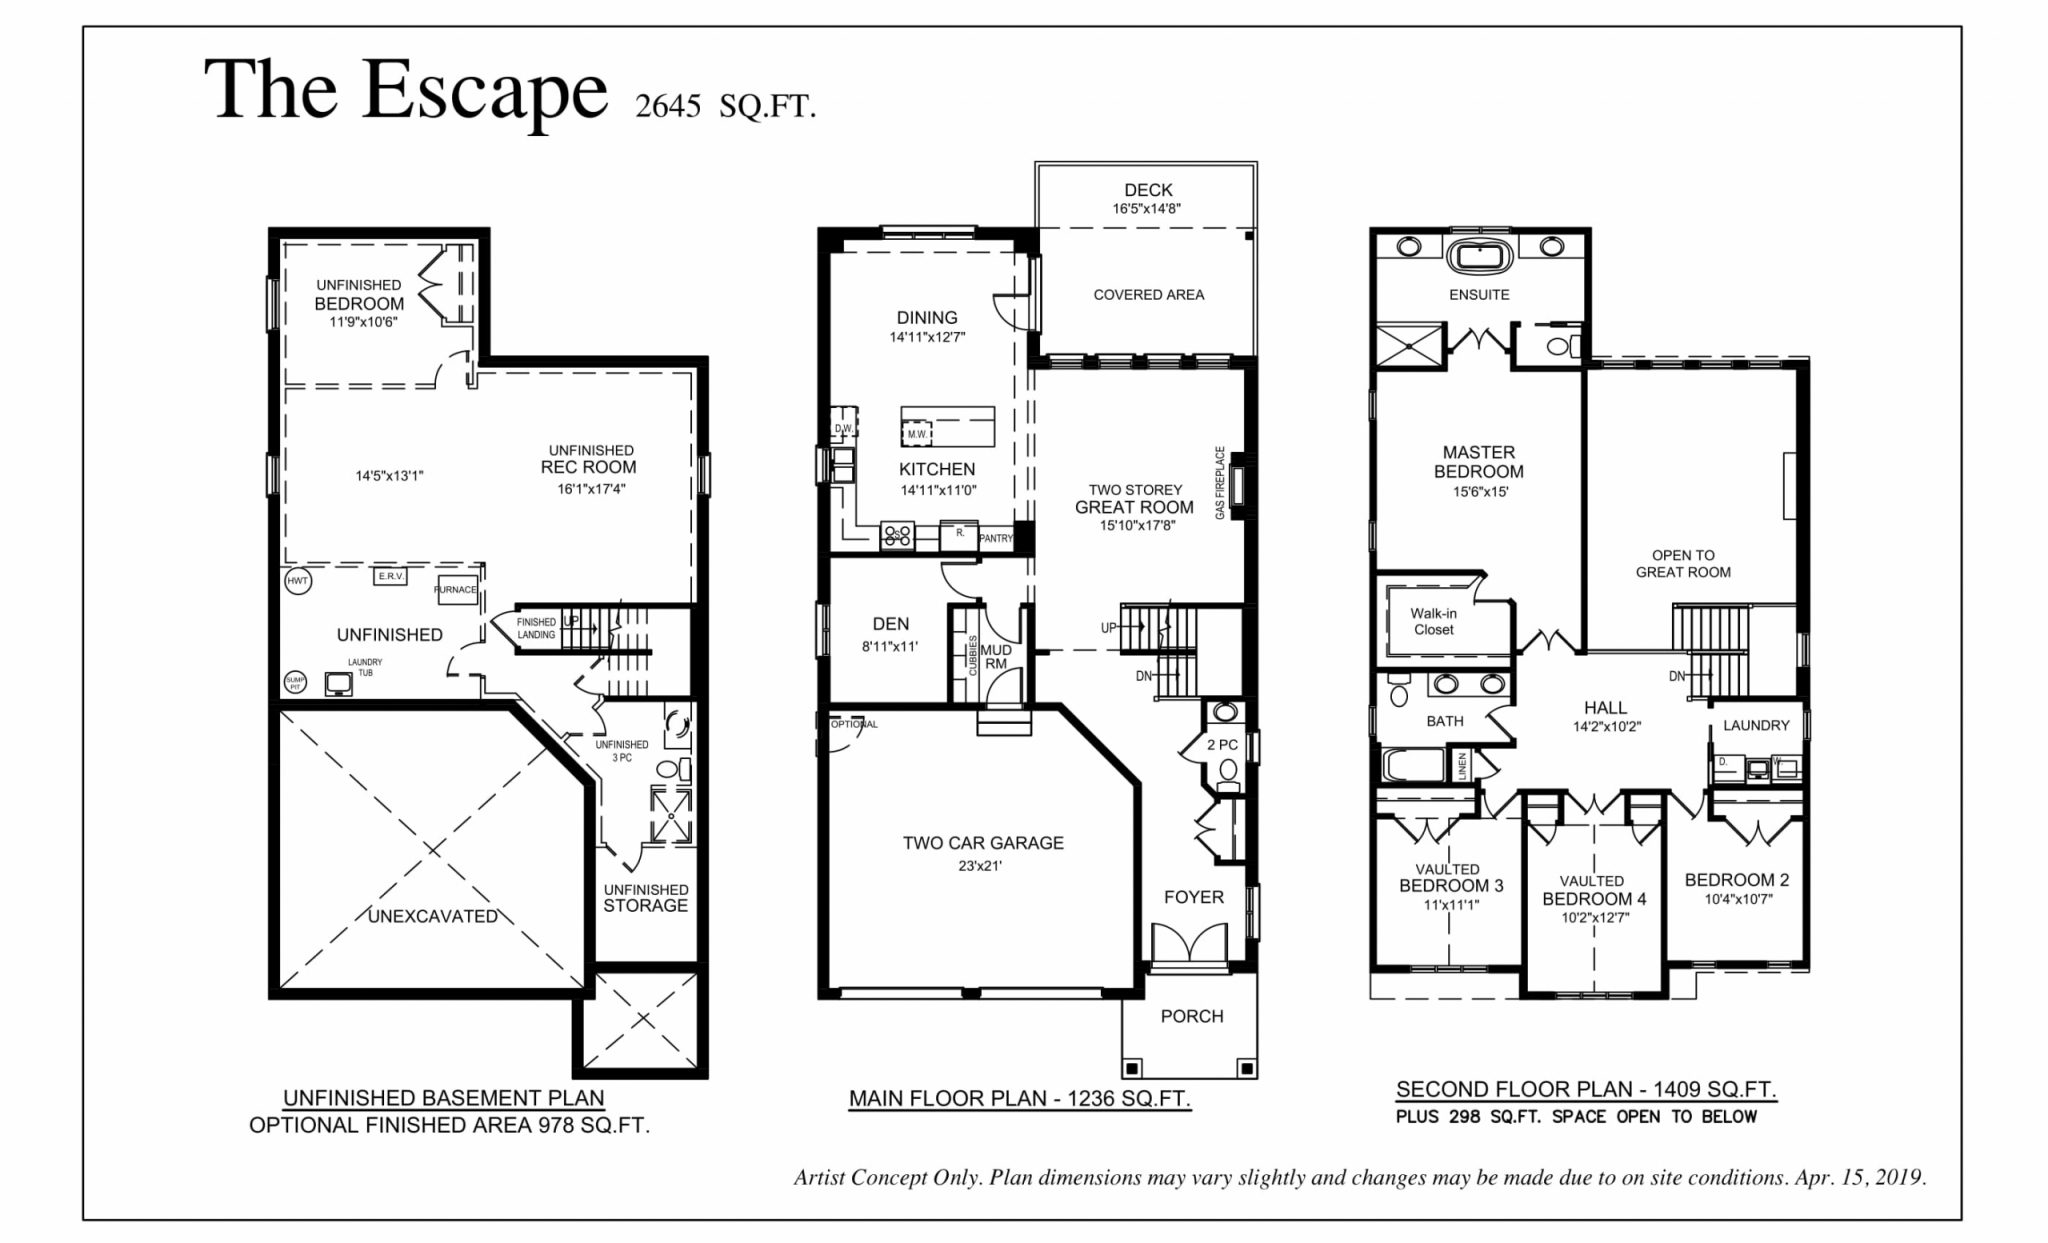  The Escape  Floor Plan of Meadowlily with undefined beds